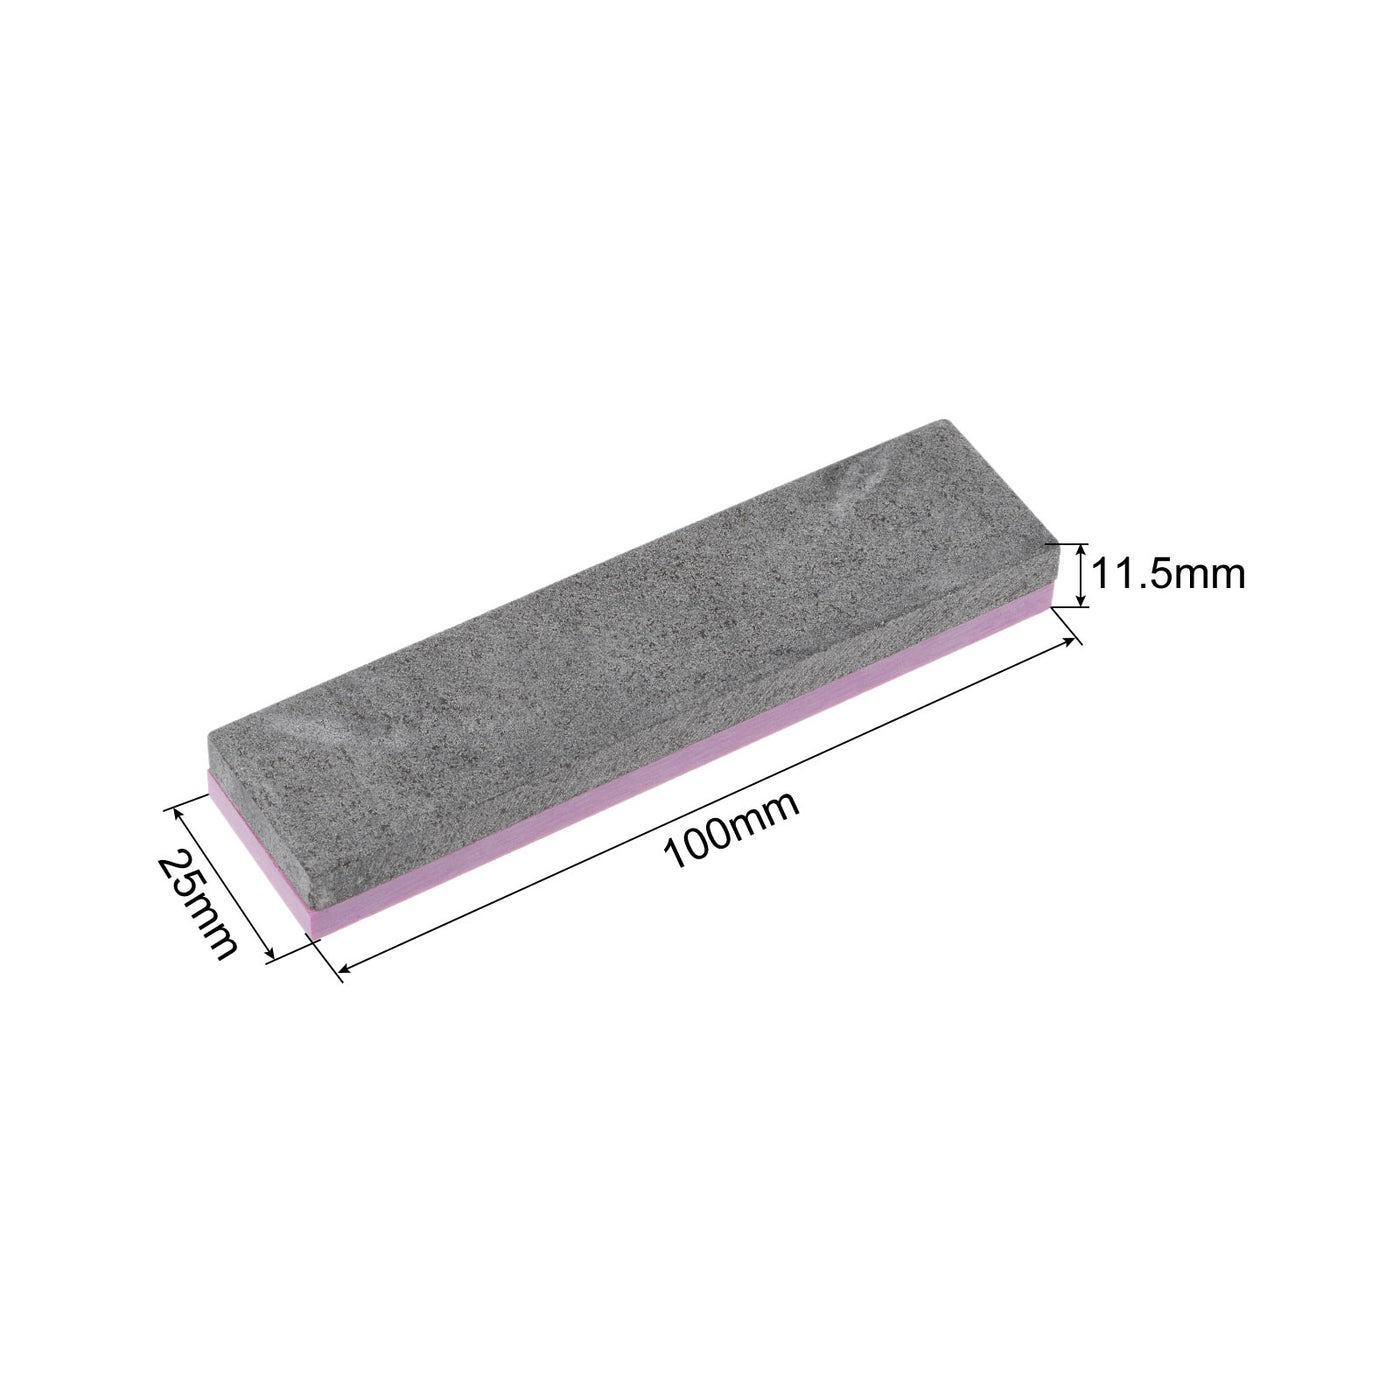 Uxcell Uxcell Sharpening Stones 1500/3000 Grit 2 Side Combination Whetstone 100x25x11.5mm